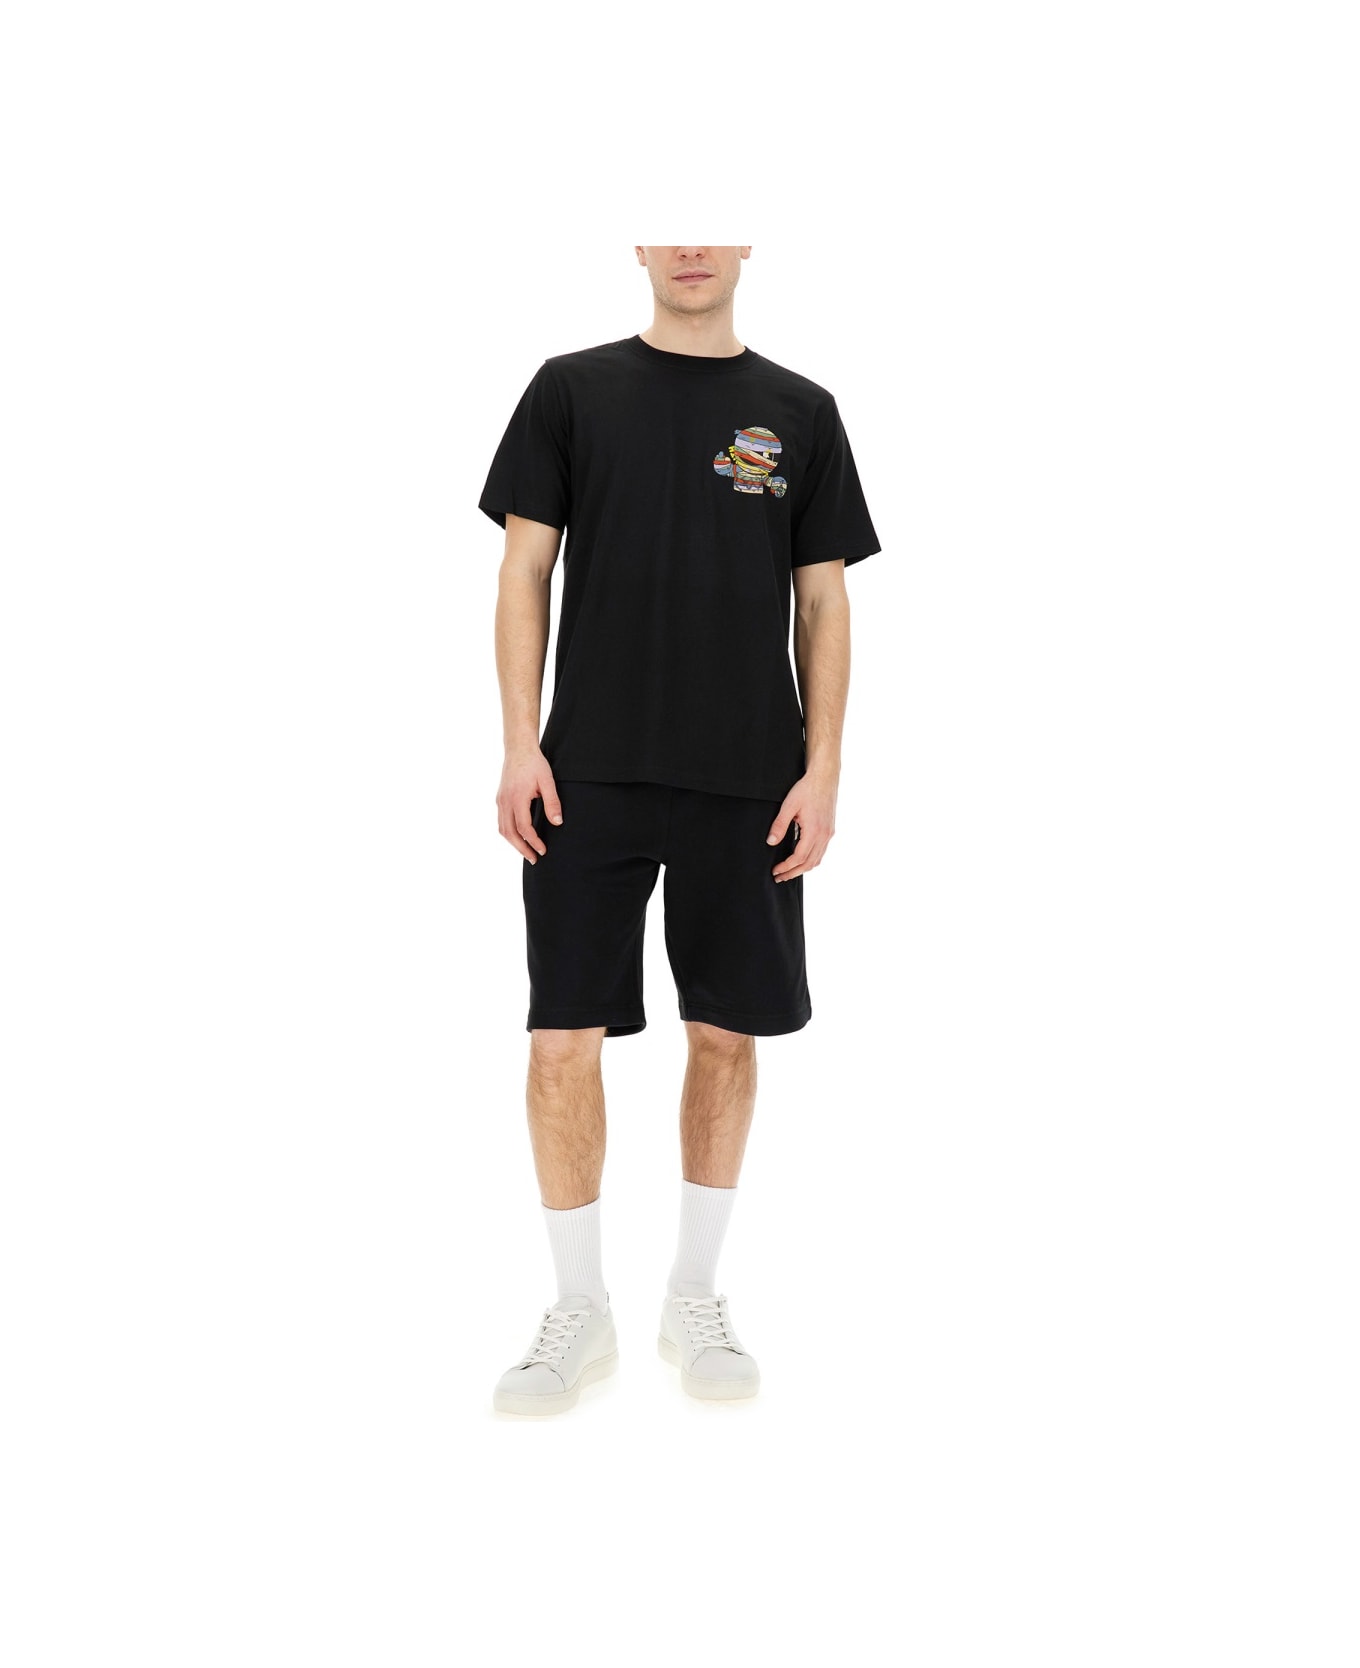 PS by Paul Smith Regular Fit T-shirt - BLACK